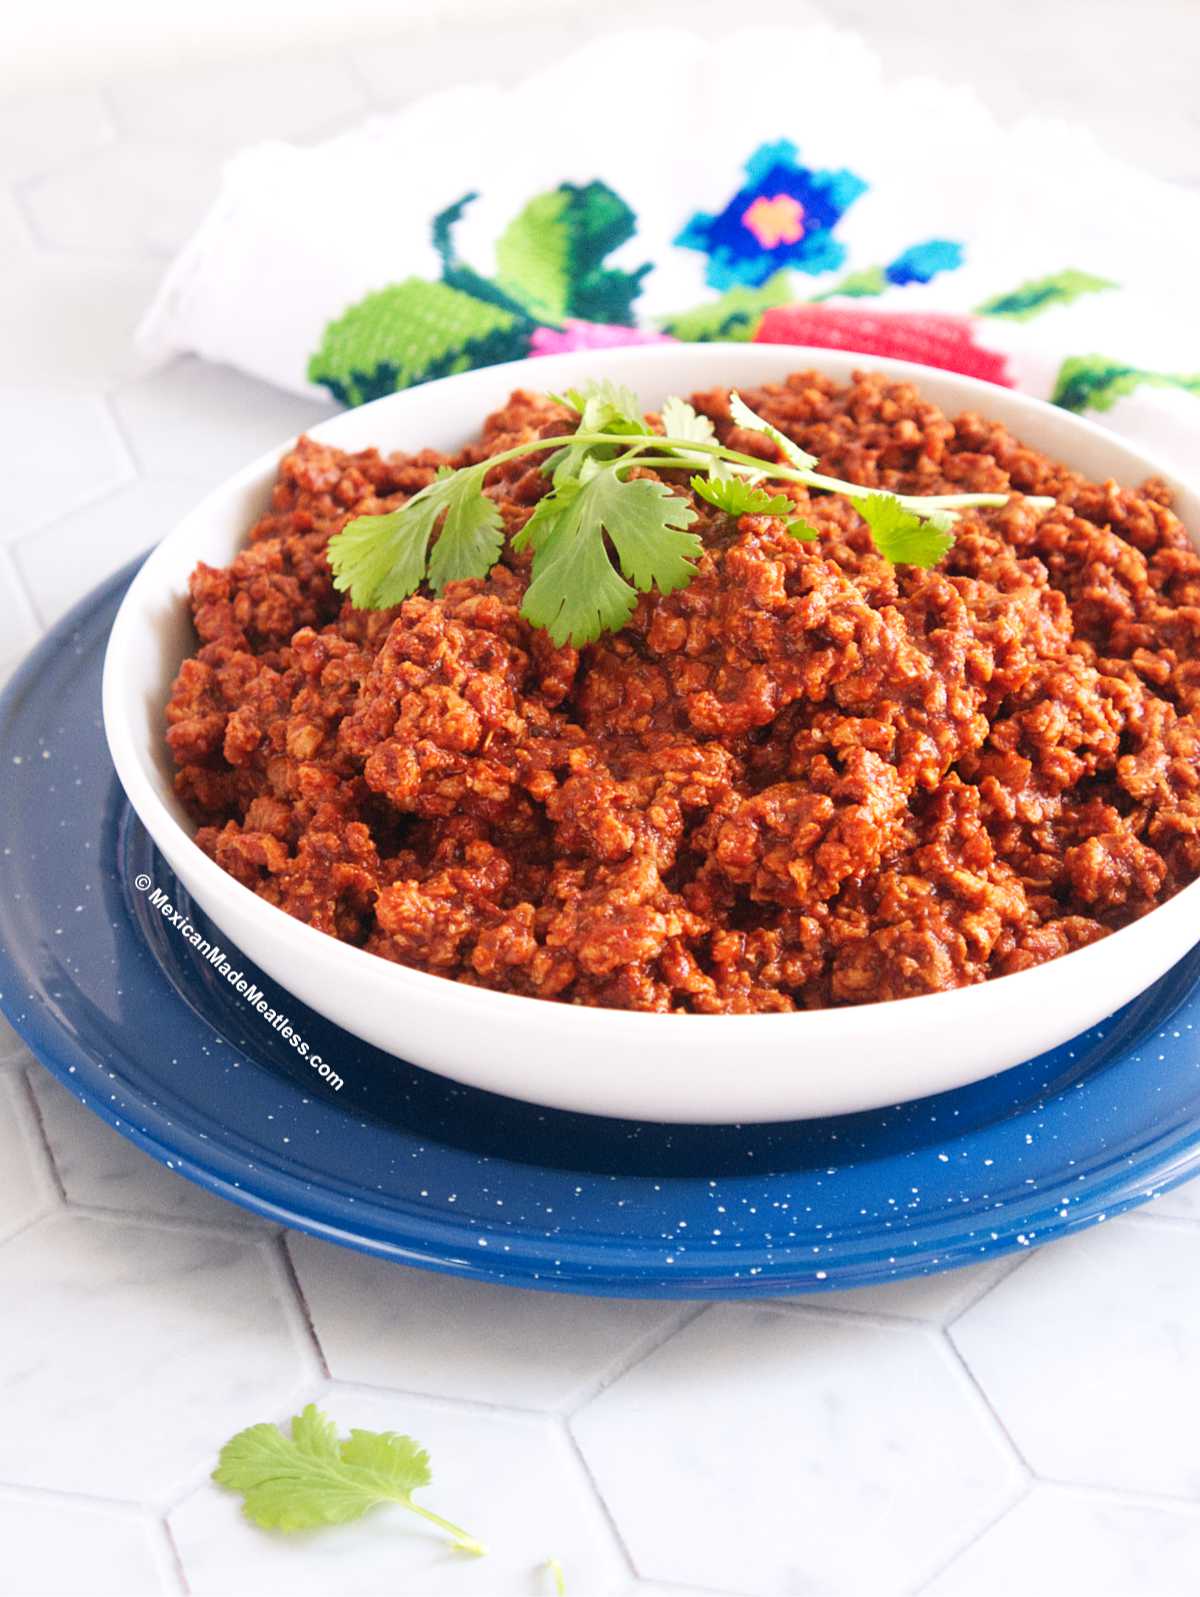 A white bowl placed on top of a blue plate and the bowl is filled with homemade Mexican vegan chorizo made from soy crumbles.